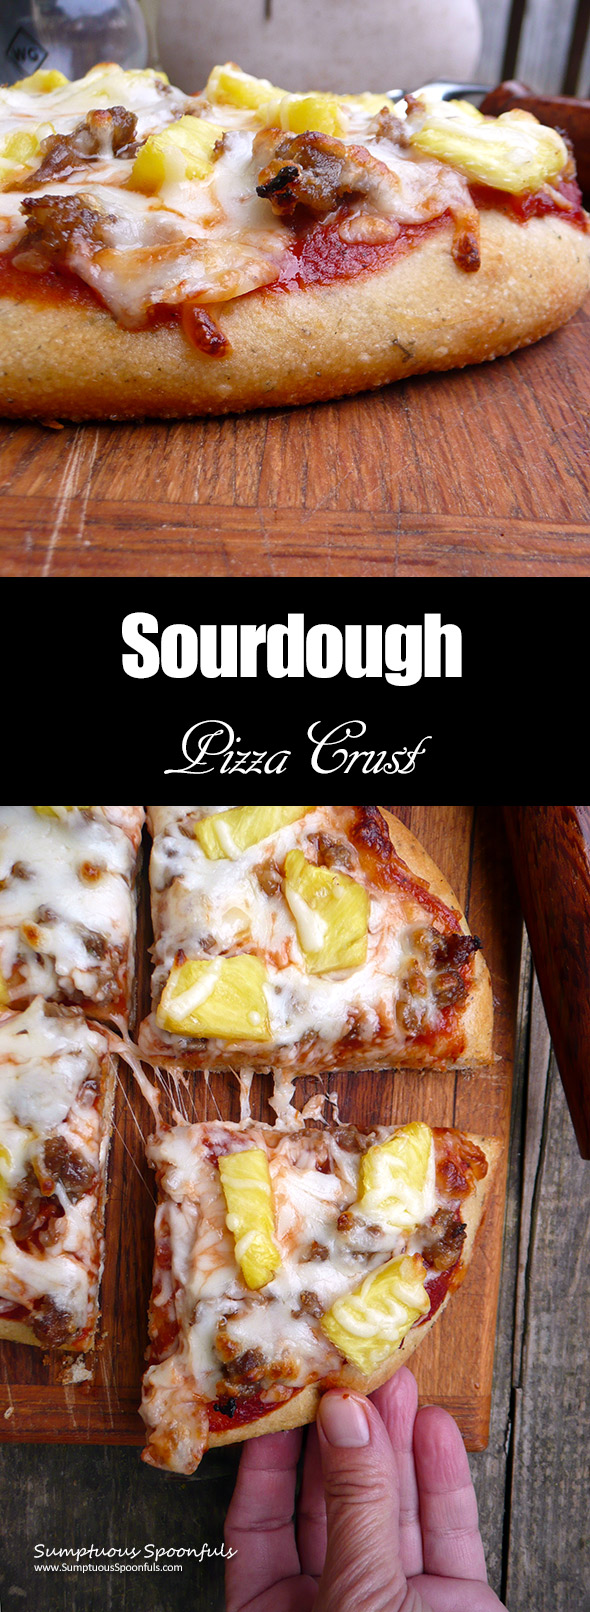 Sourdough Pizza Crust ~ Seasoned with Garlic & Italian Seasoning, this easy pizza crust is perfectly crisp on the bottom and soft in the middle